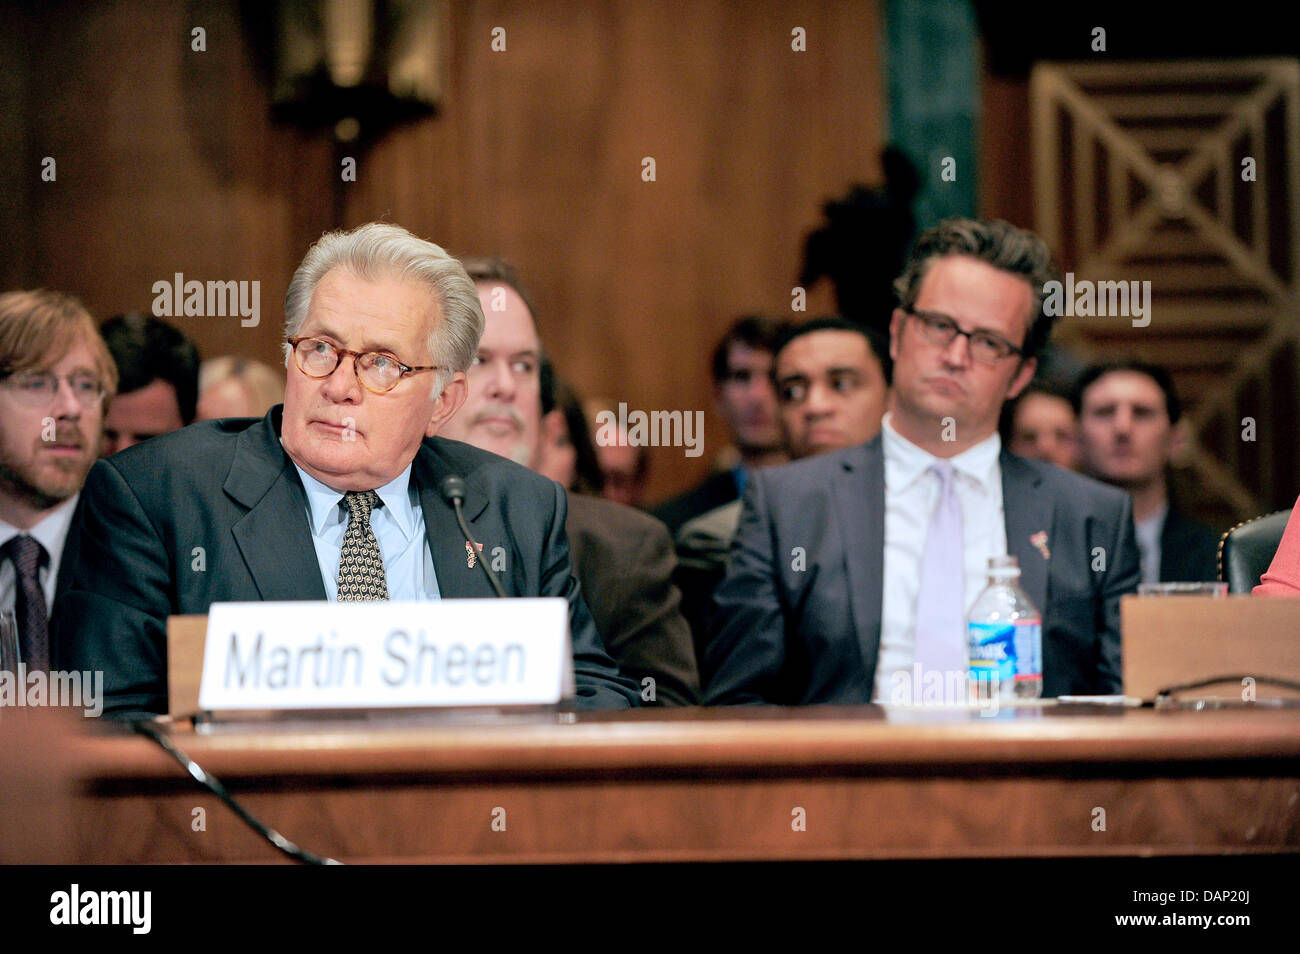 Actor Martin Sheen (L) testifies during a hearing before the United States Senate Committee on the Judiciary Subcommittee on Crime and Terrorism on 'Drug and Veterans Treatment Courts: Seeking Cost-Effective Solutions for Protecting Public Safety and Reducing Recidivism' in Washington, D.C. on Tuesday, July 19, 2011. Actor Matthew Perry looks on from right. Photo: Ron Sachs/CNP Stock Photo